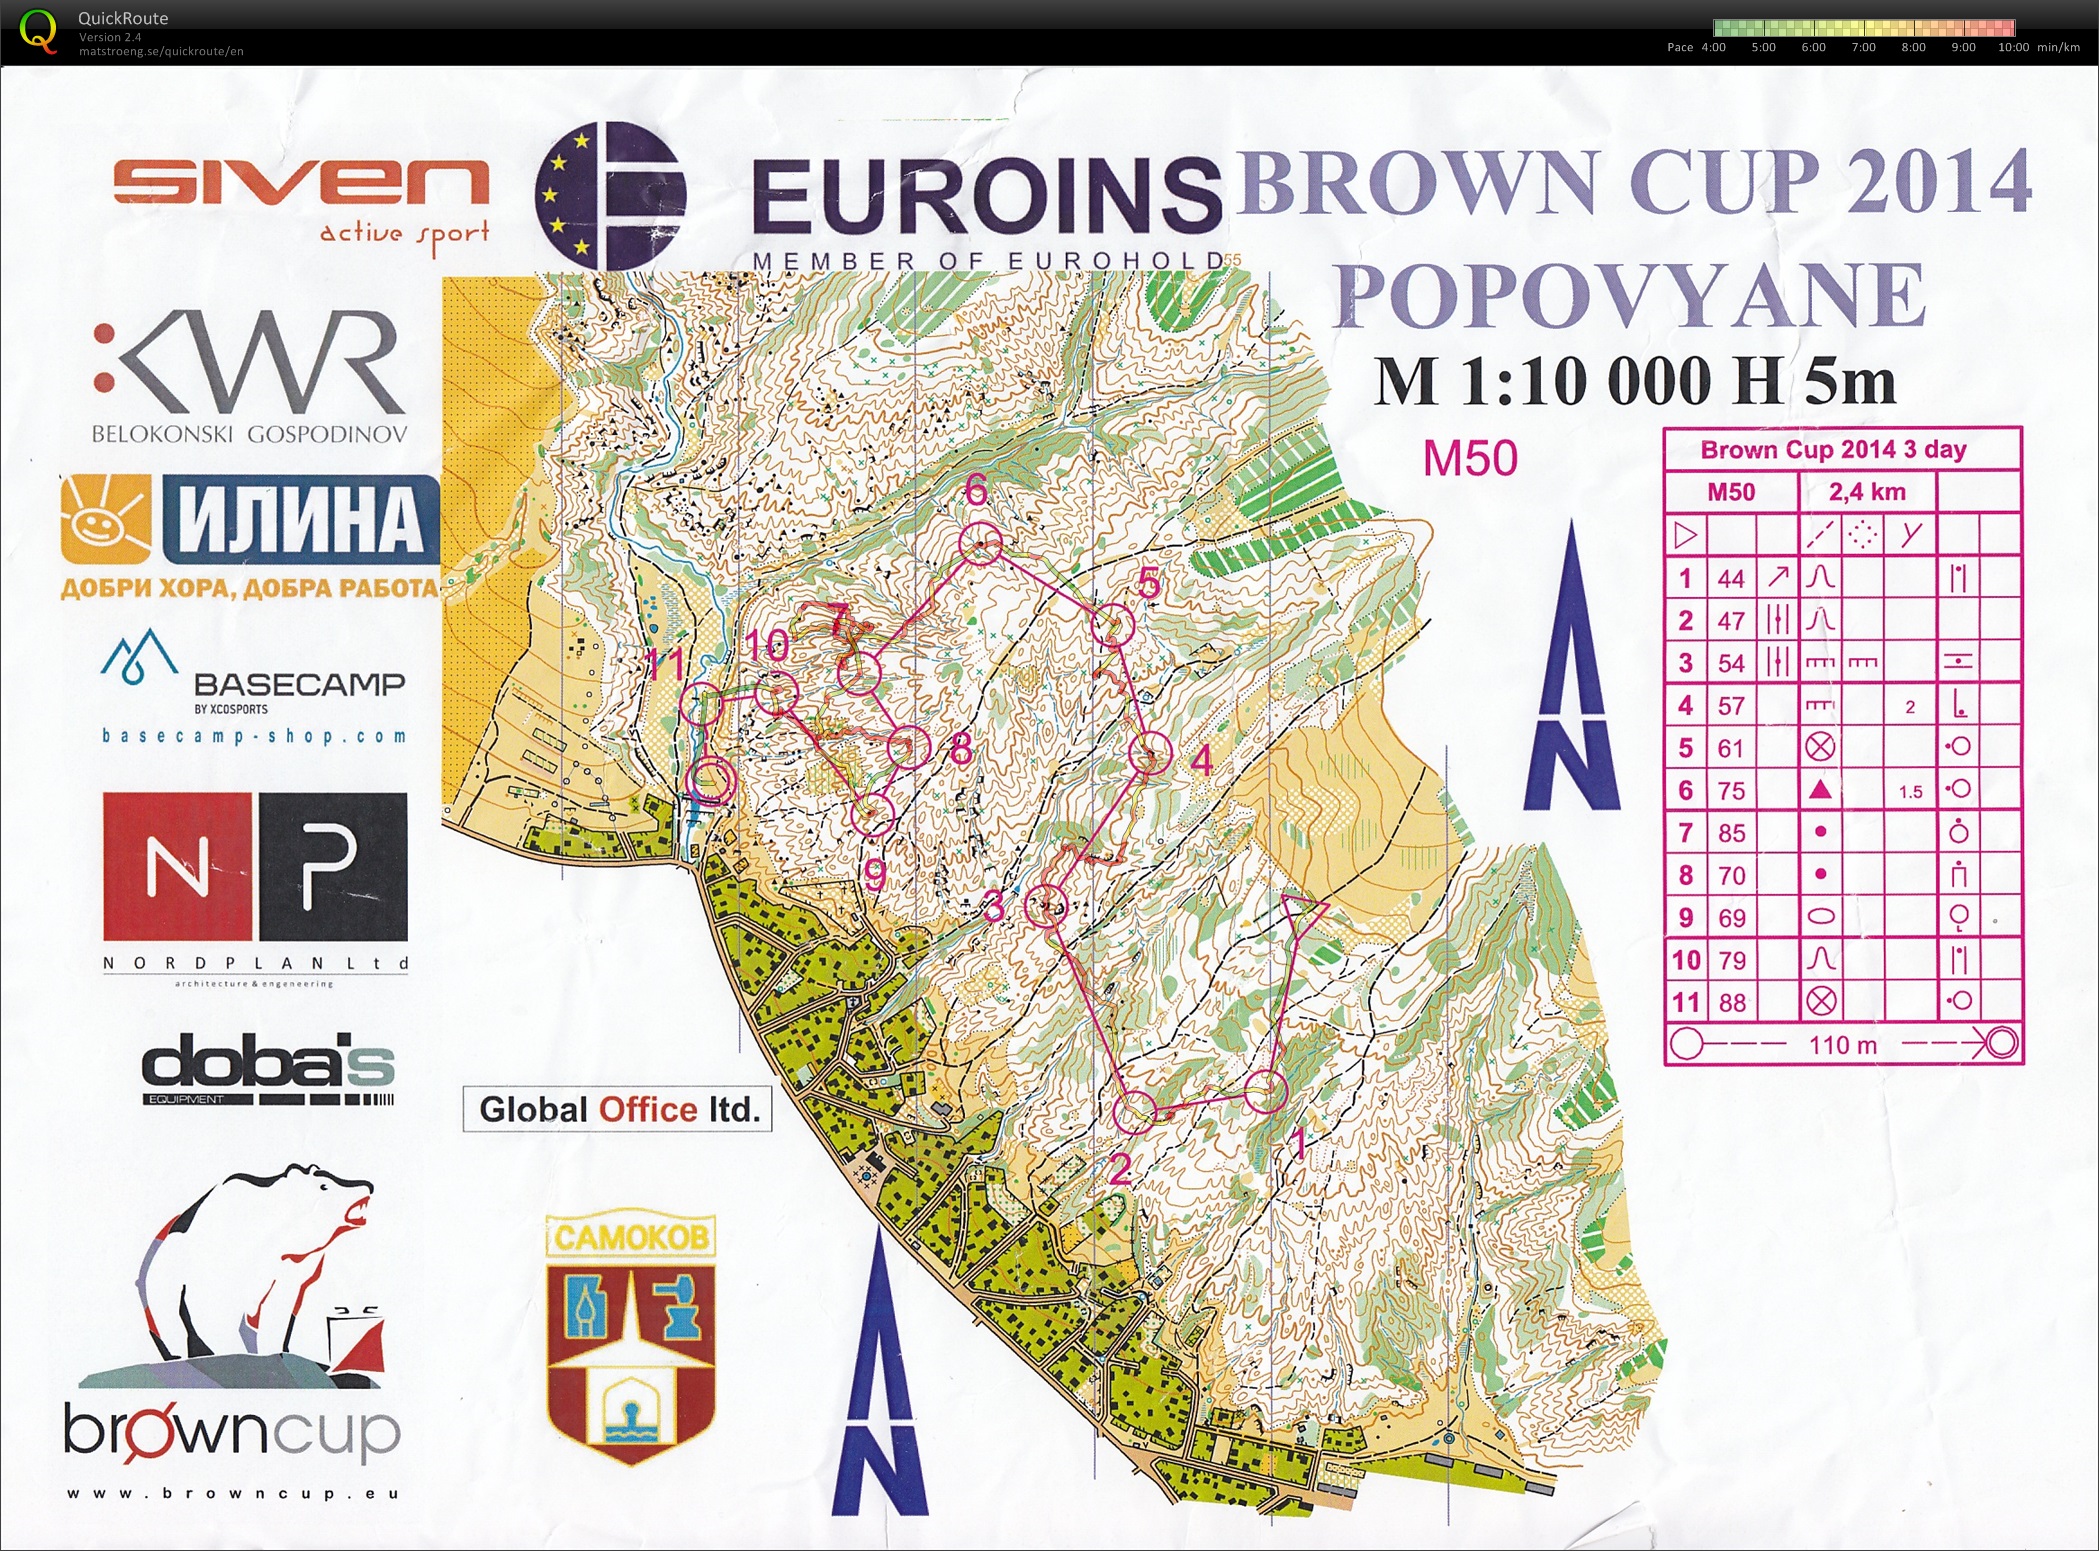 Brown-Cup 2014 E3 (2014-05-05)